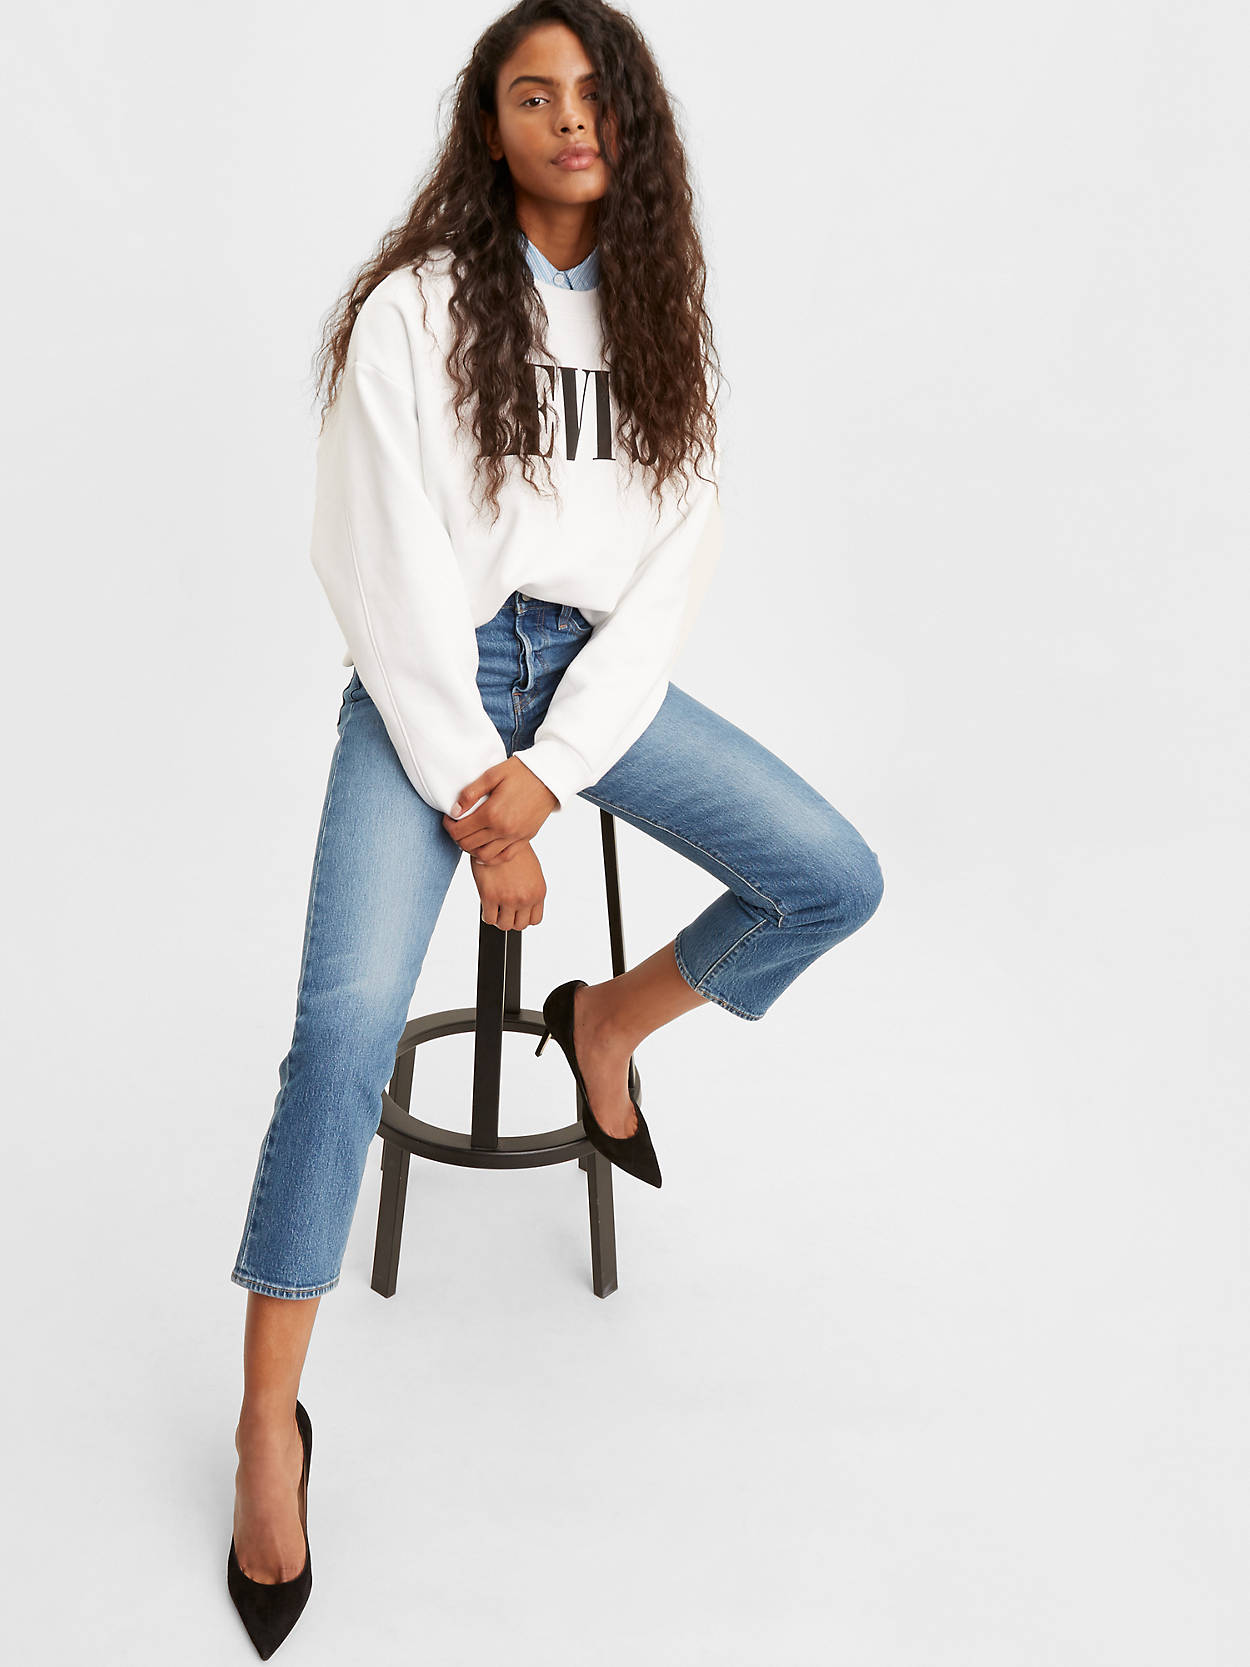 Levi’s: UP TO 75% OFF CLOSEOUT STYLES